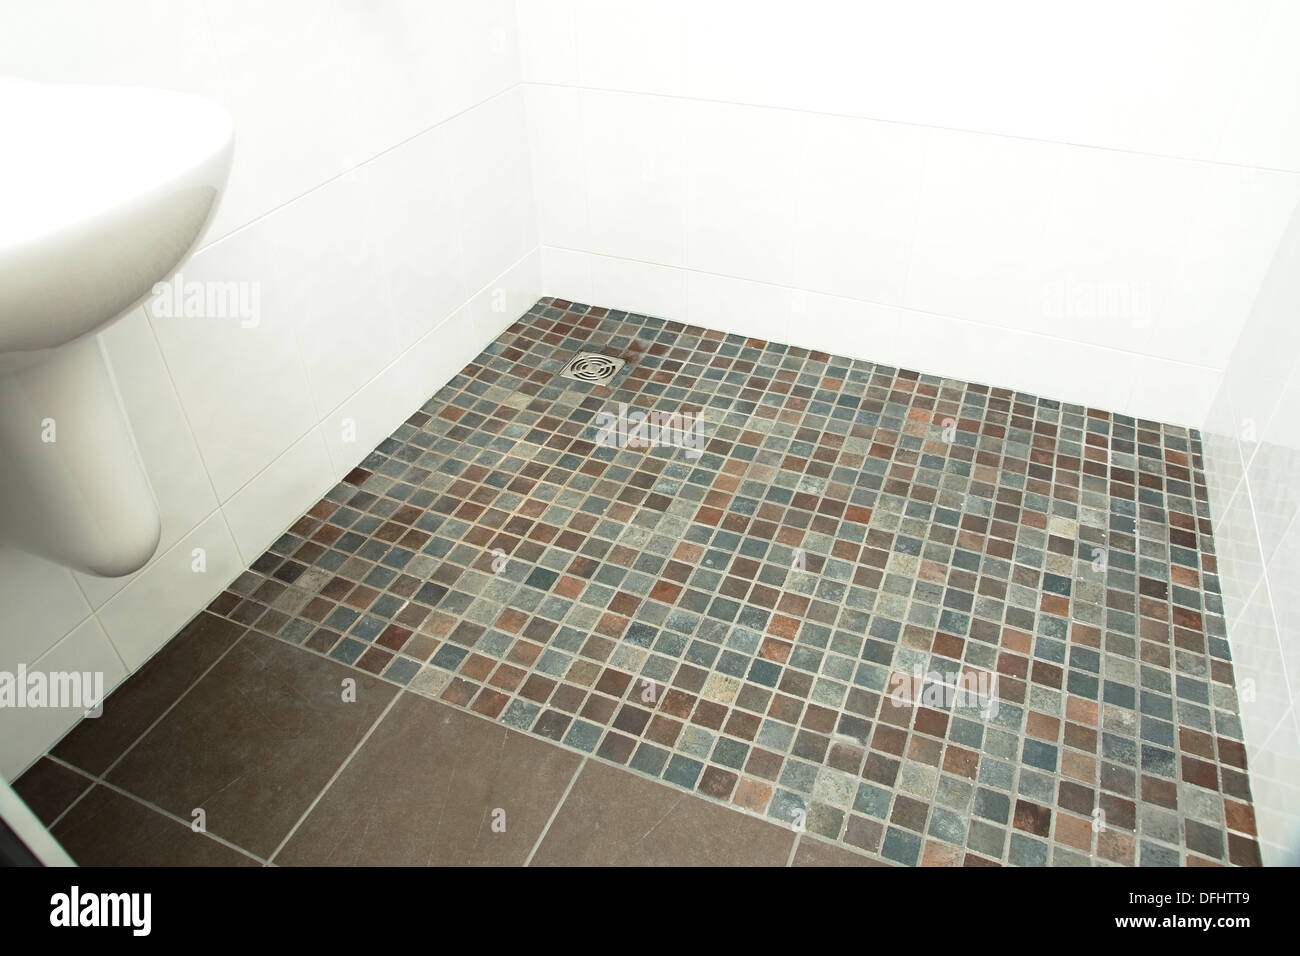 A specially adapted wet room shower \/ bathroom with non slip tiles Stock Photo, Royalty Free 